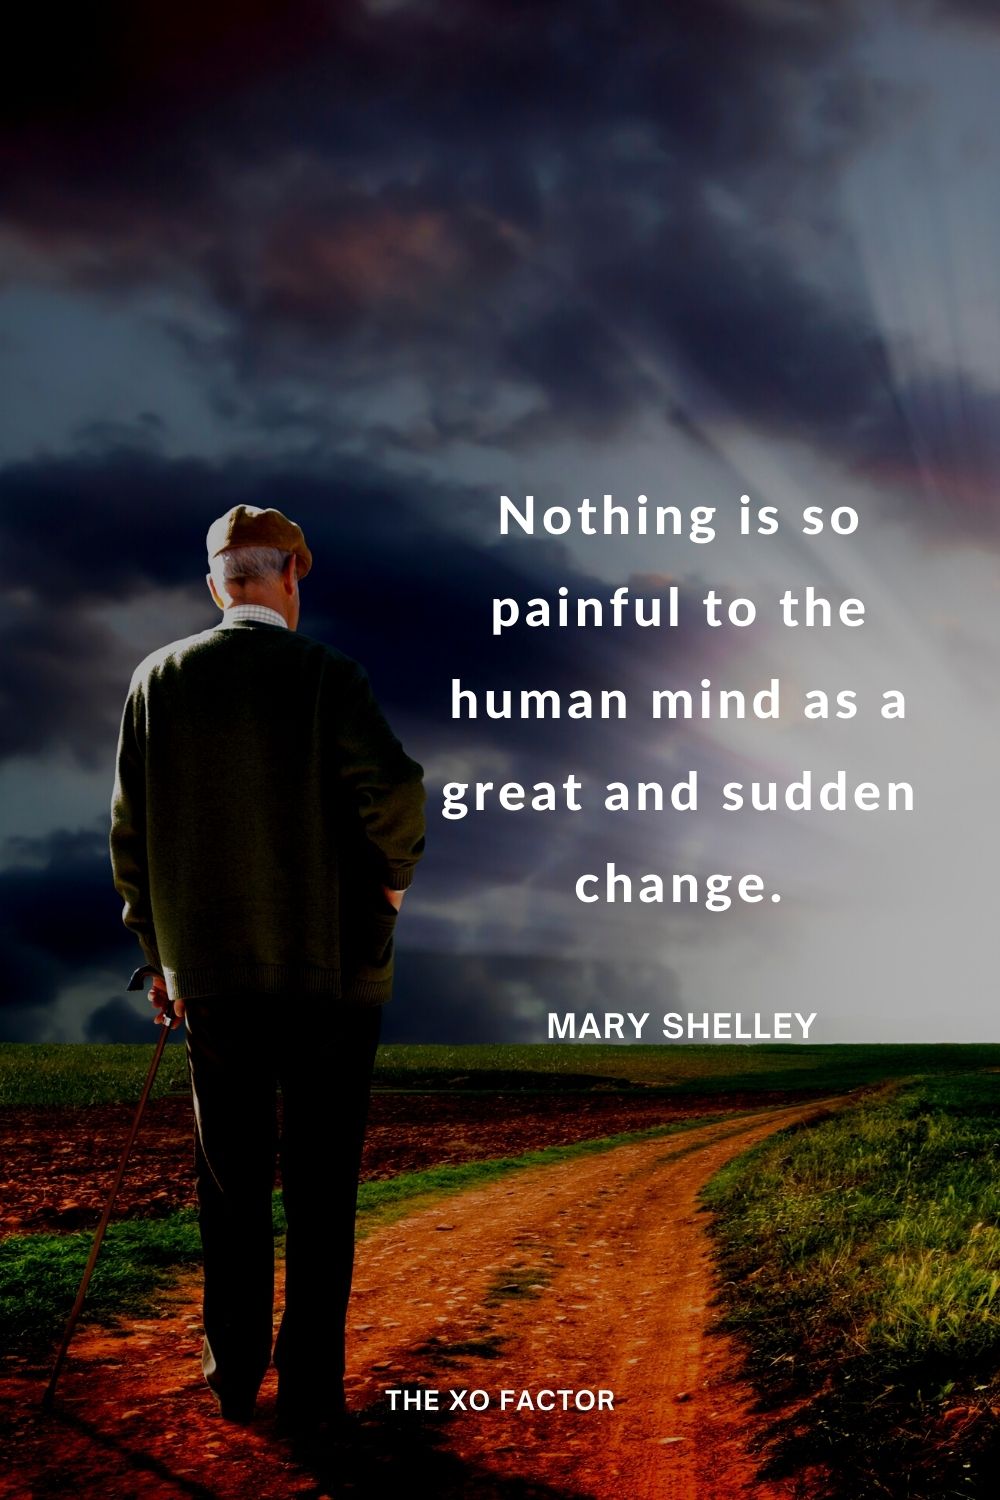 Nothing is so painful to the human mind as a great and sudden change. Mary Shelley